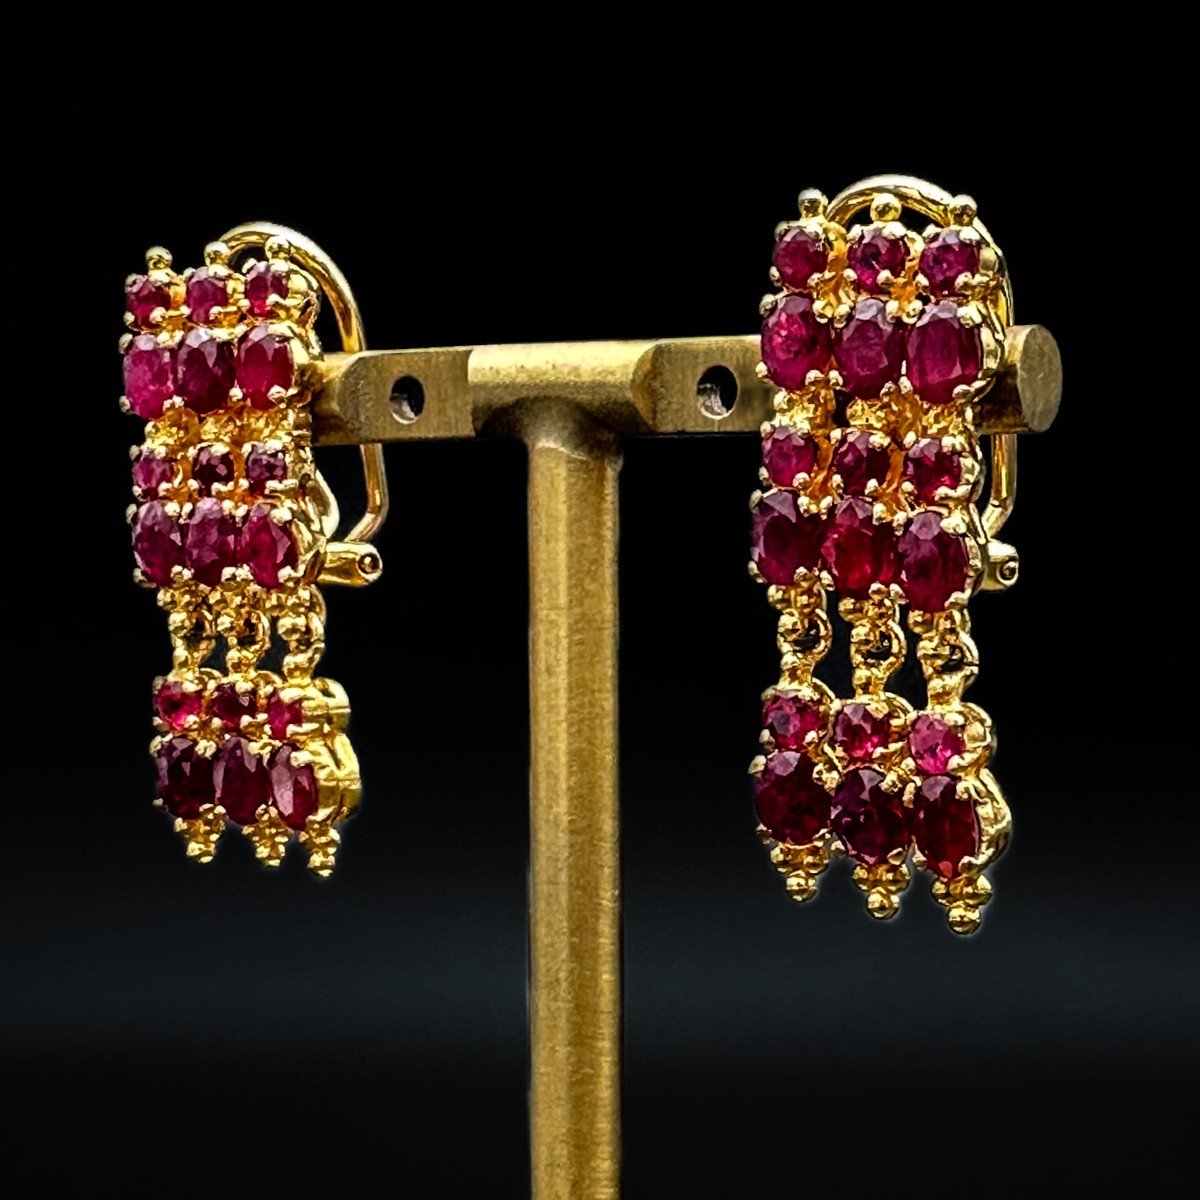 Vintage Earrings In 18k Yellow Gold, Set With Rubies